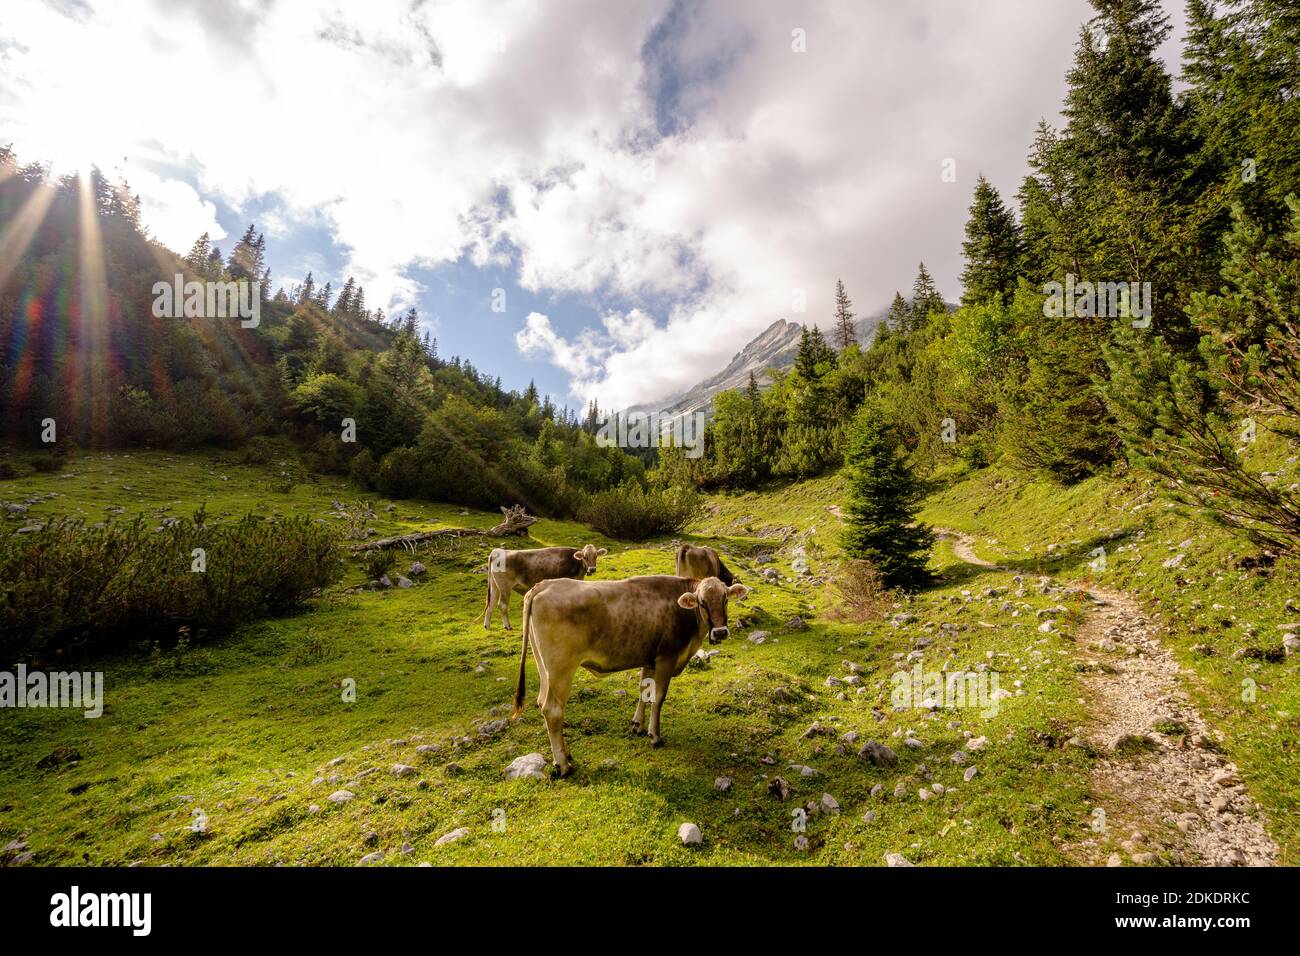 Cows stand next to the hiking trail in Johannistal, in the Karwendel, Tyrol / Austria Banque D'Images